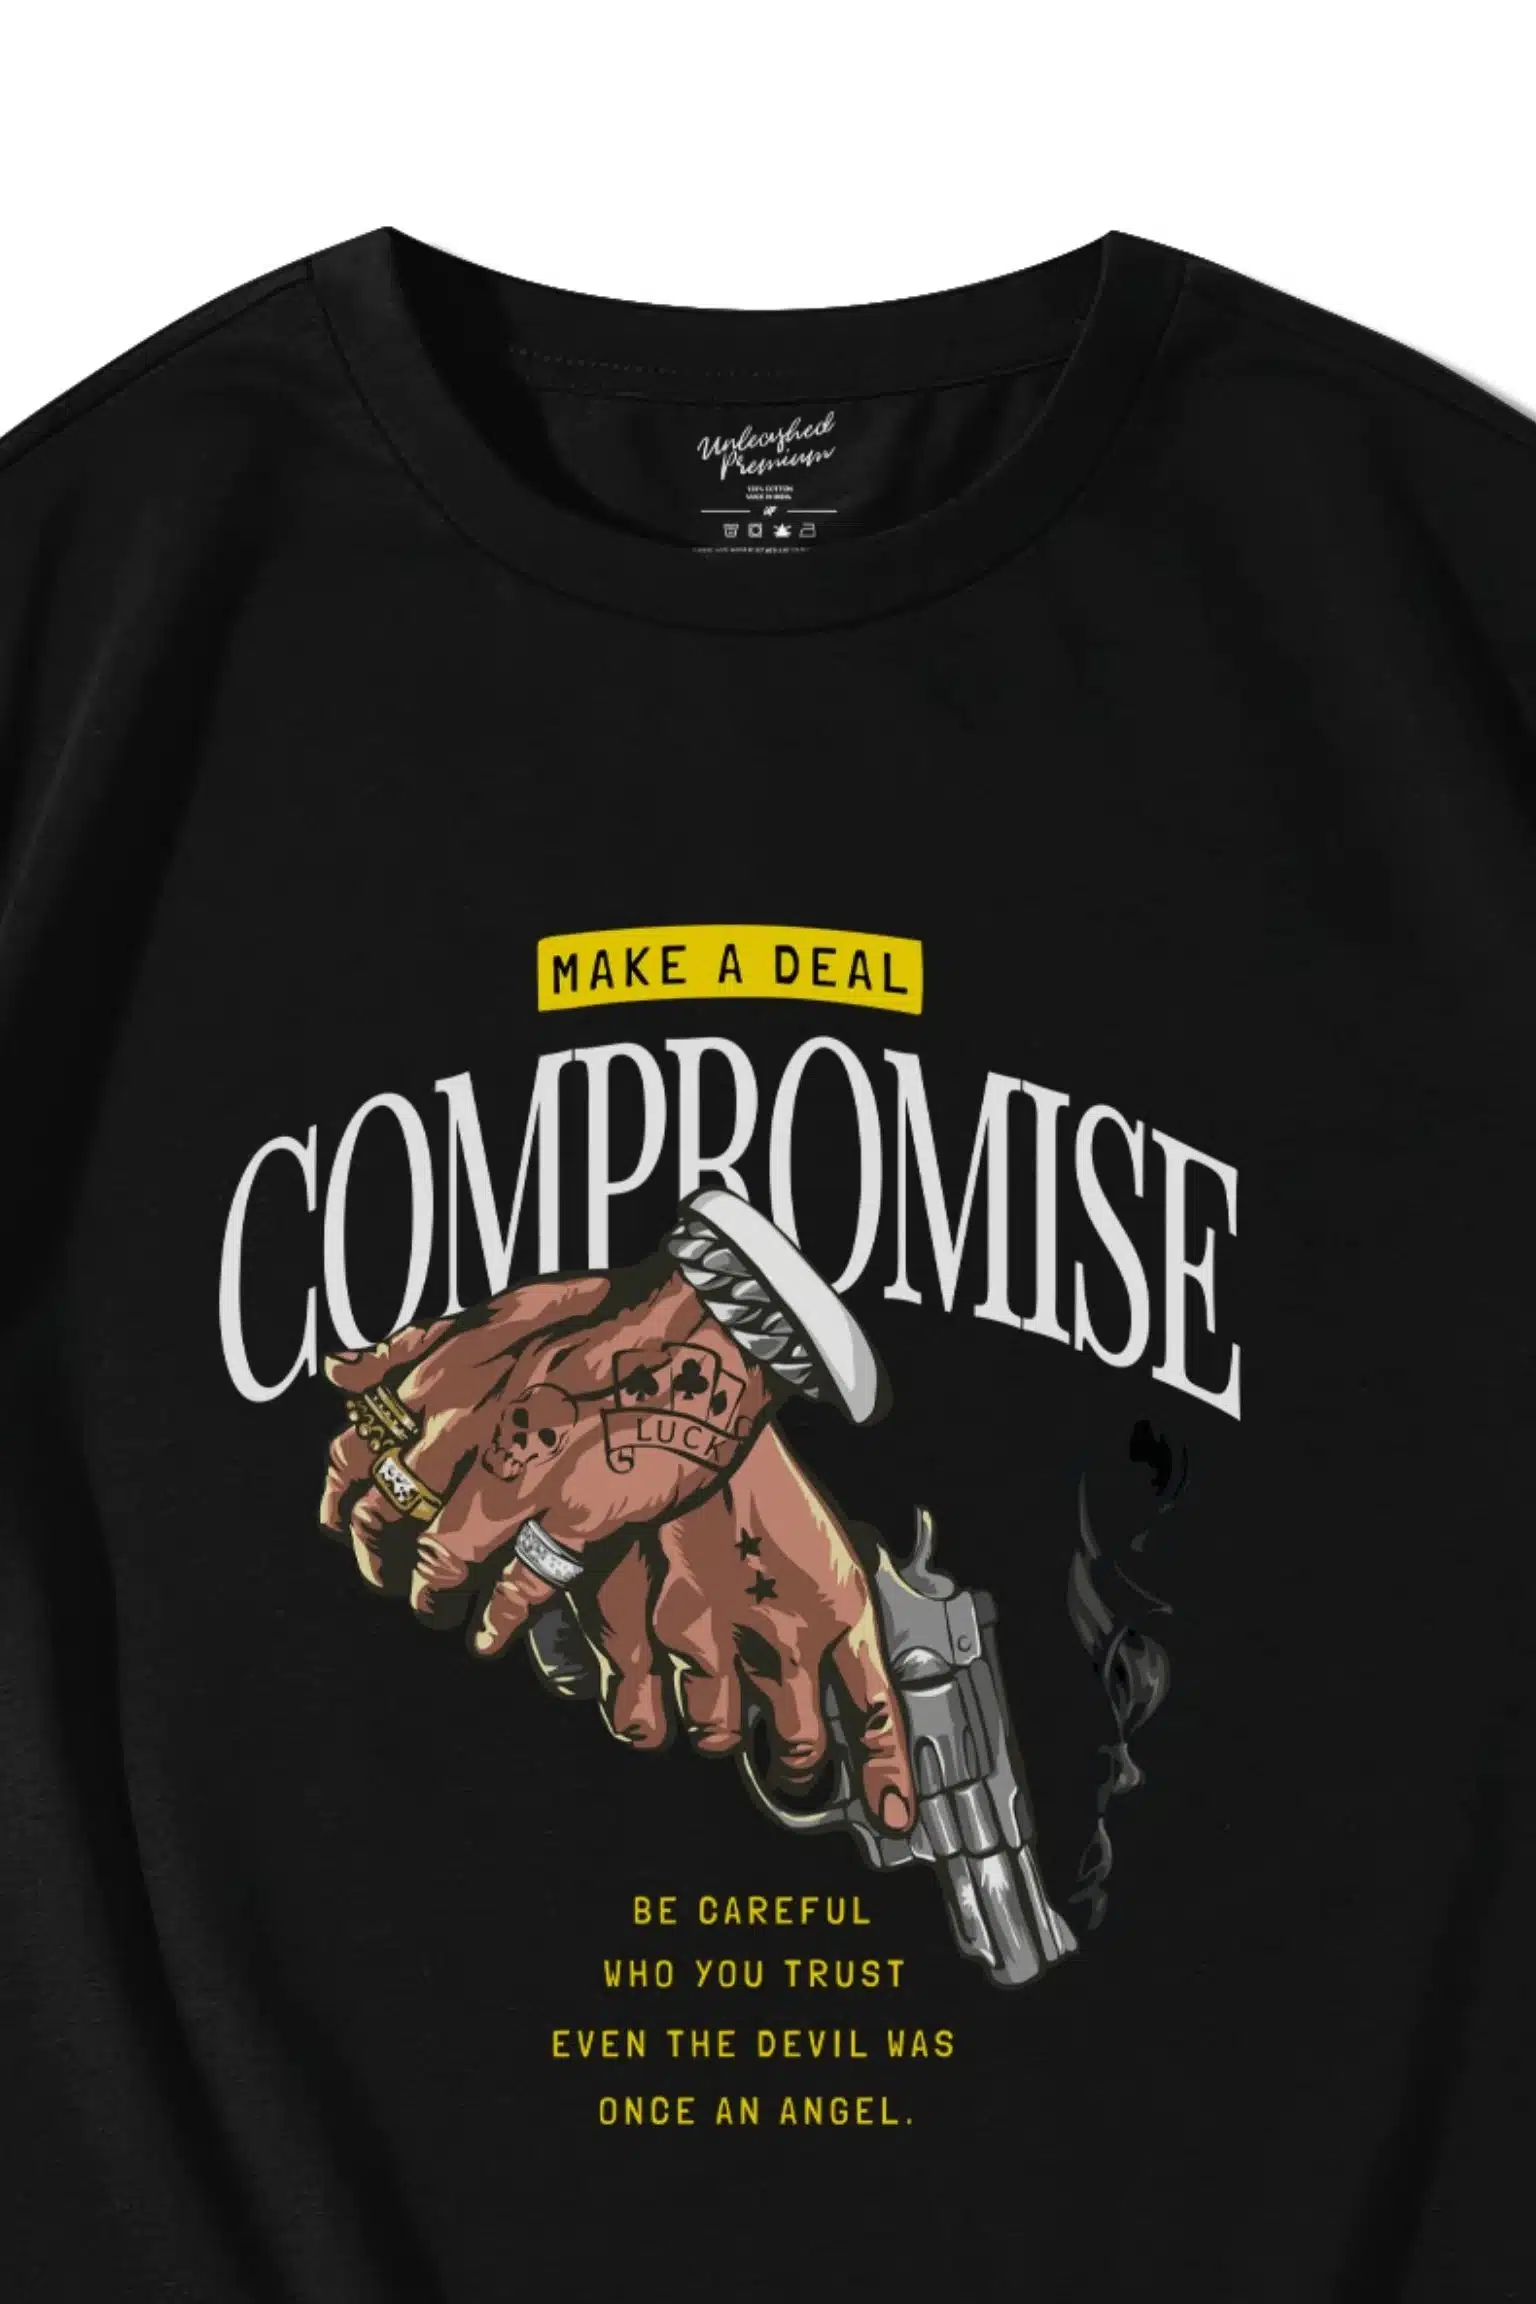 Compromise Oversized T-Shirt